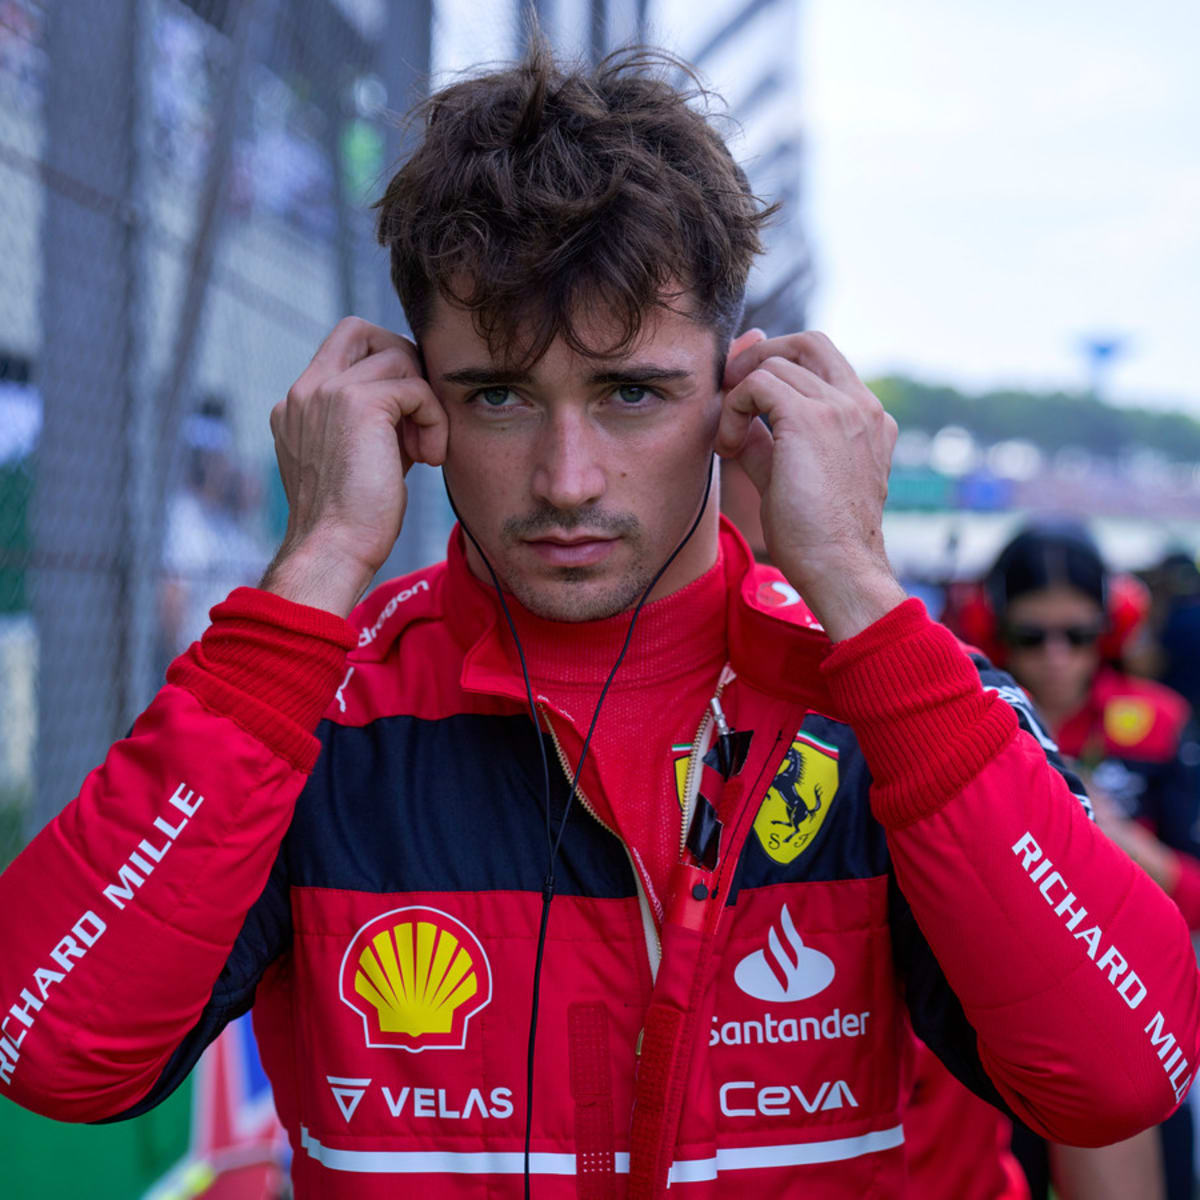 Charles Leclerc Shocks Fans With New Venture Away From F1 - F1 Briefings: Formula 1 News, Rumors, Standings and More